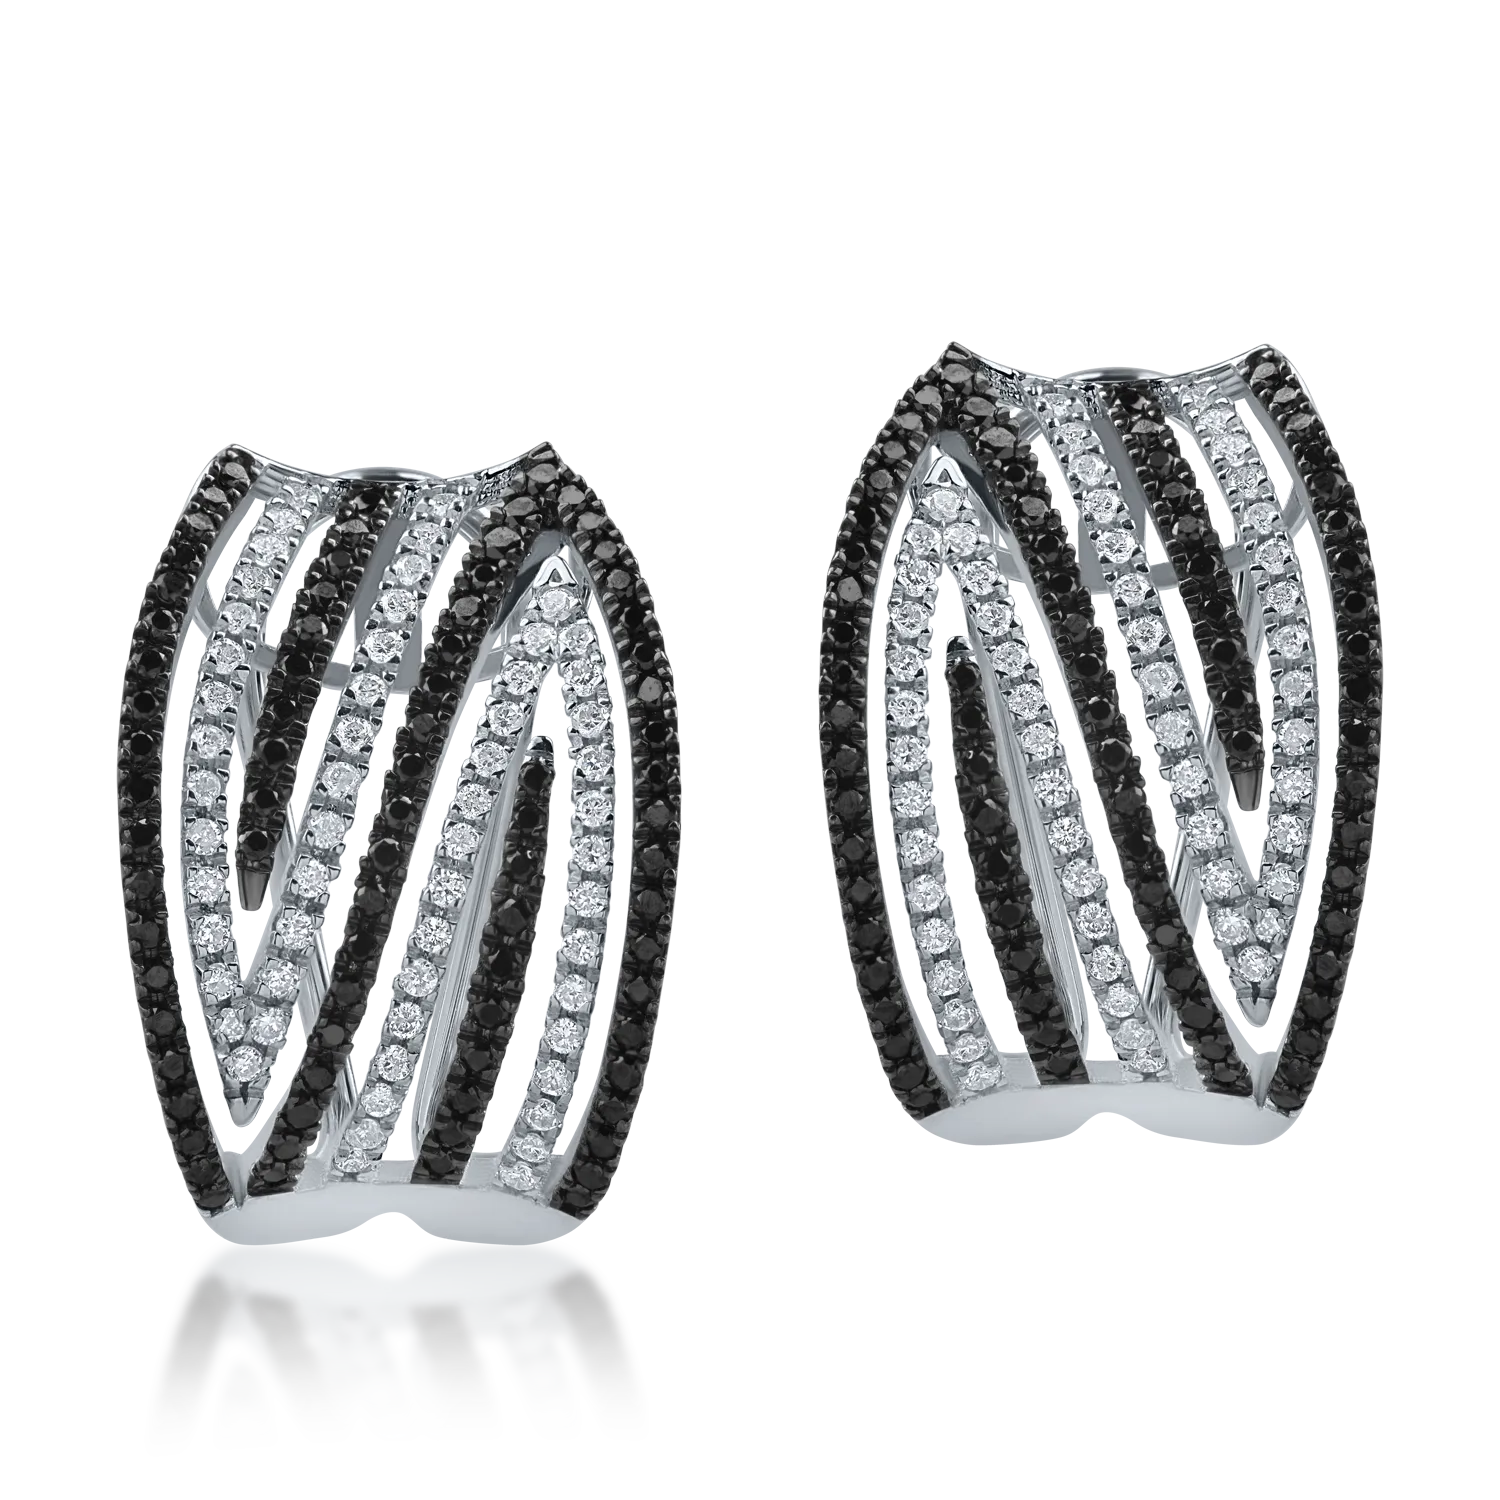 White gold earrings with 0.38ct clear diamonds and 0.47ct black diamonds